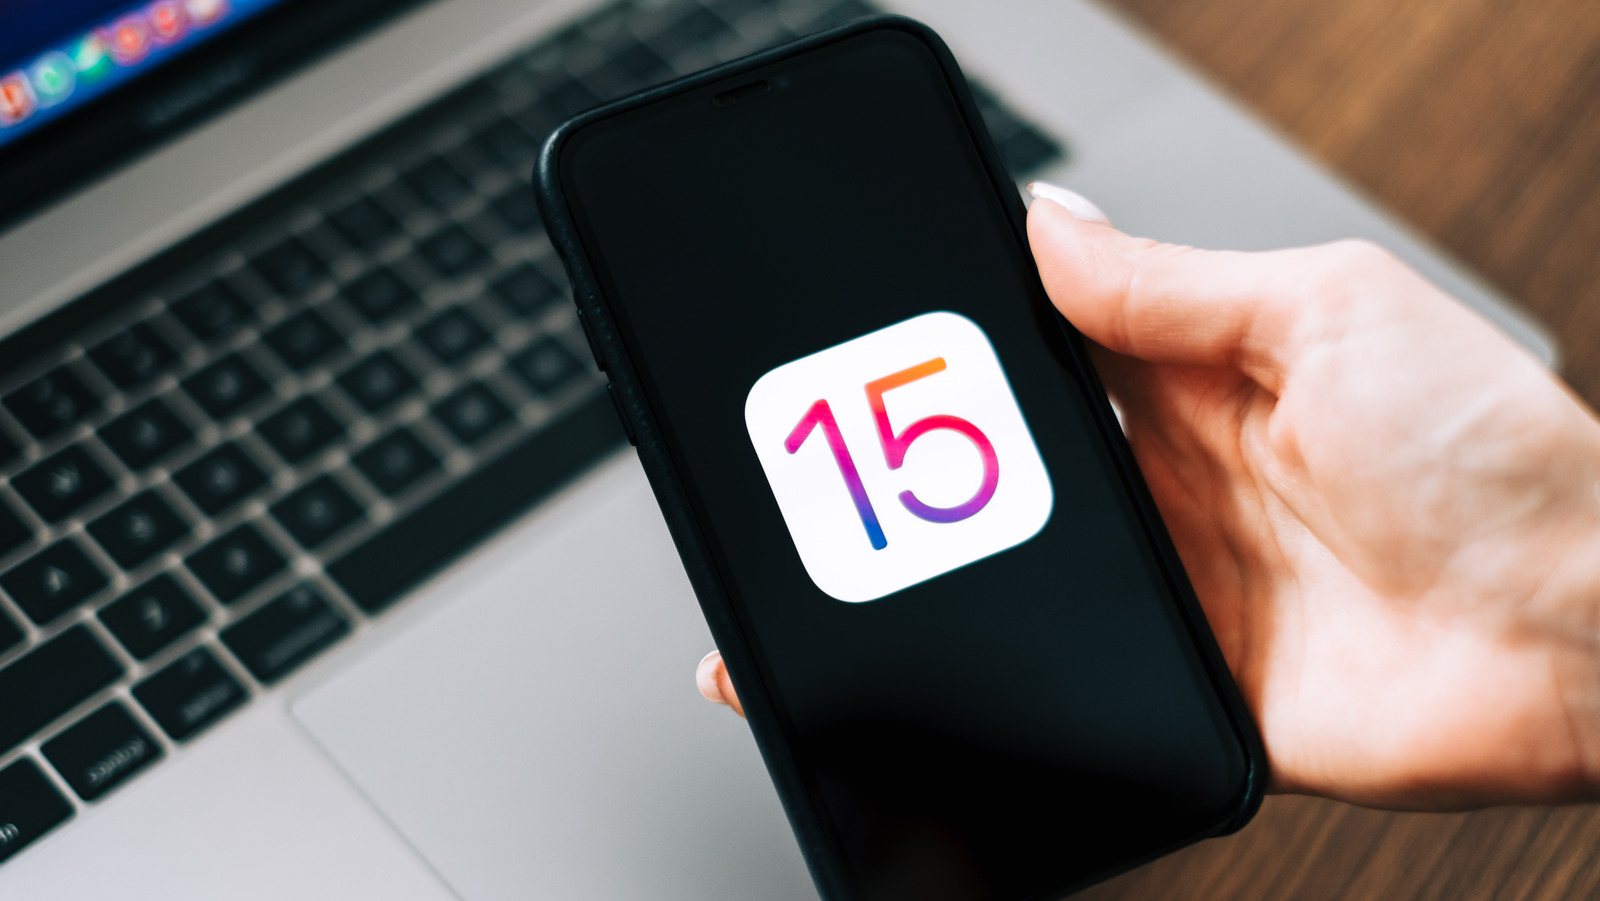 iOS 15.5 Beta Is Now Available To Developer Beta Testers